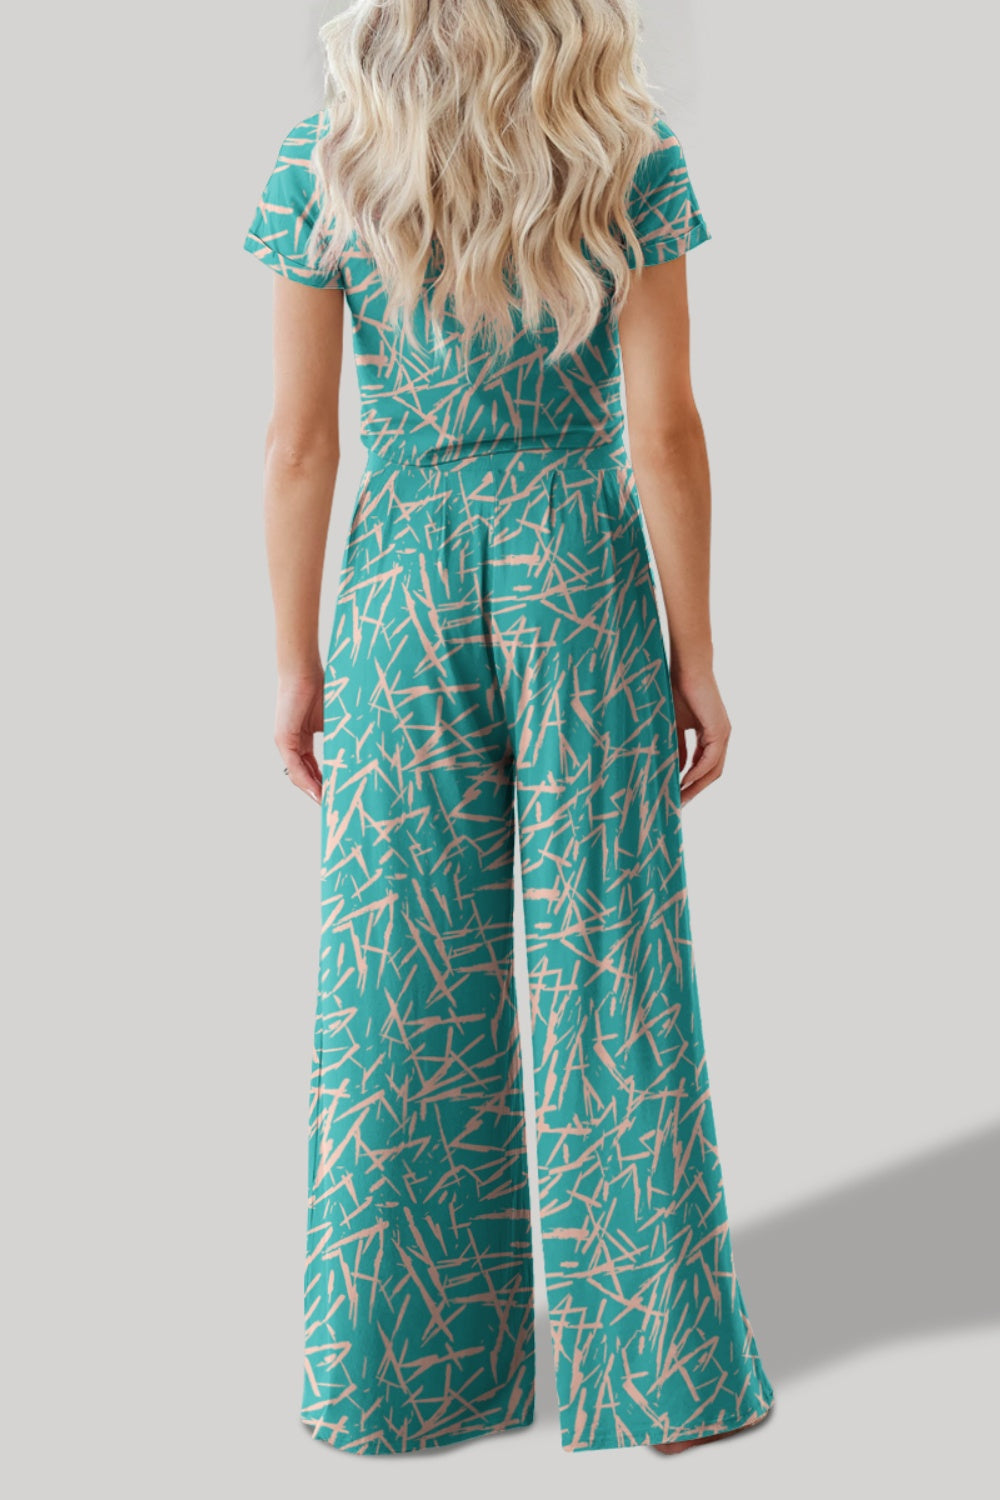 STUNNLY  Printed Round Neck Short Sleeve Top and Pants Set   